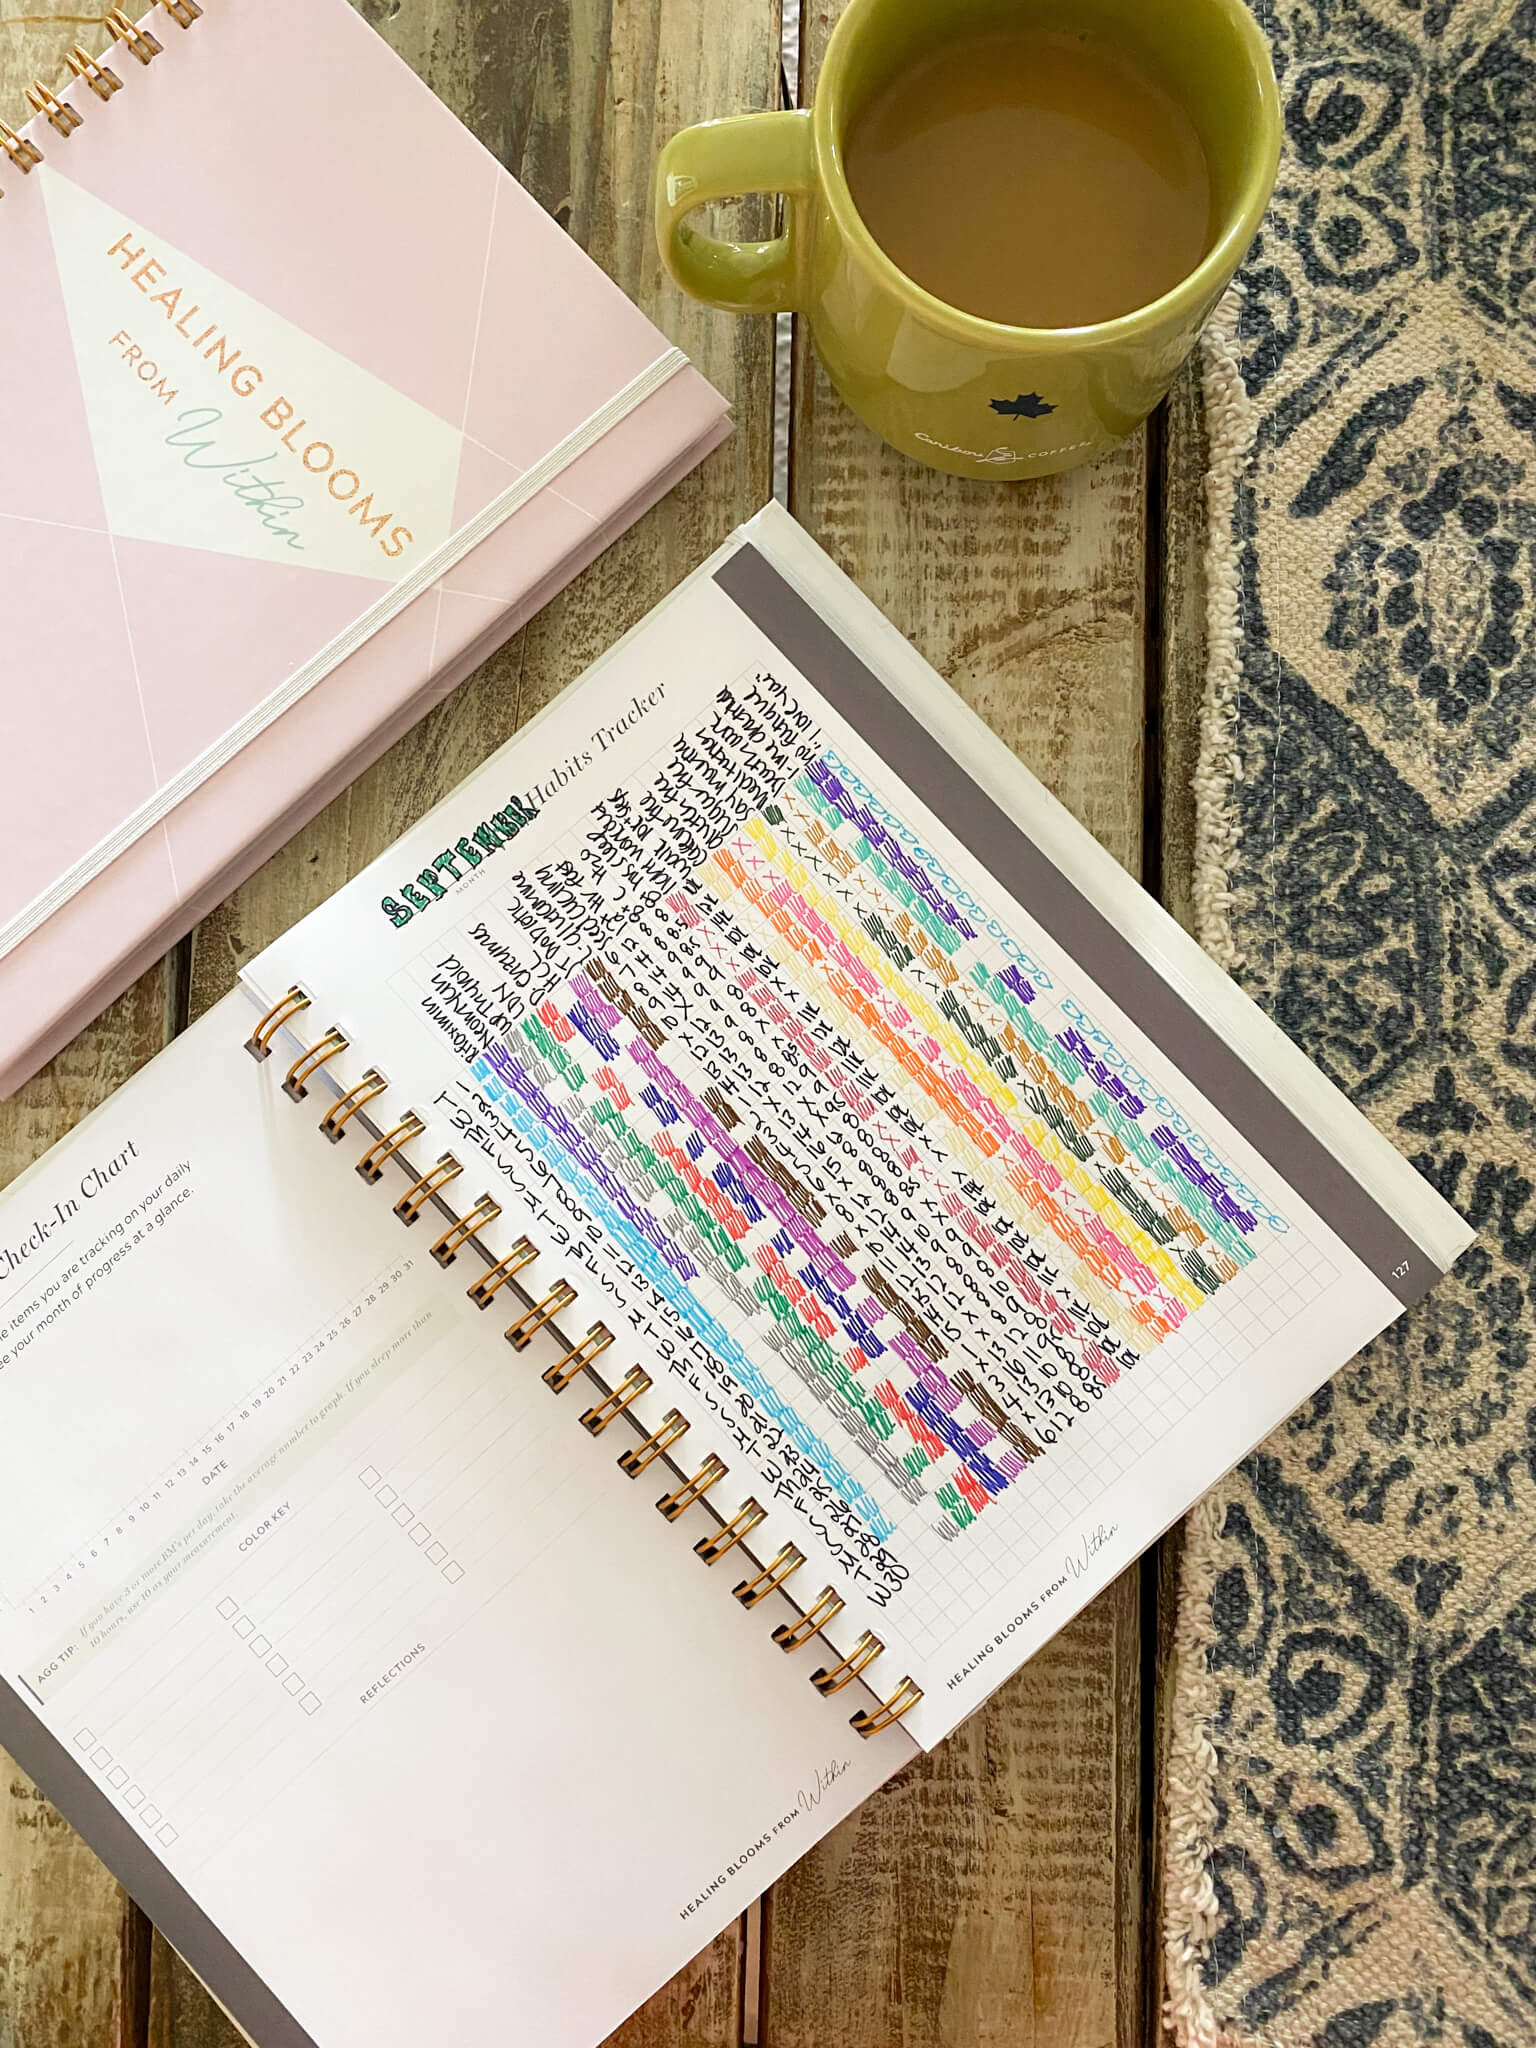 34 gut health and healing habits to track in your bullet journal agutsygirl.com #guthealing #foodjournal #eliminationdiet #healthlog ideas